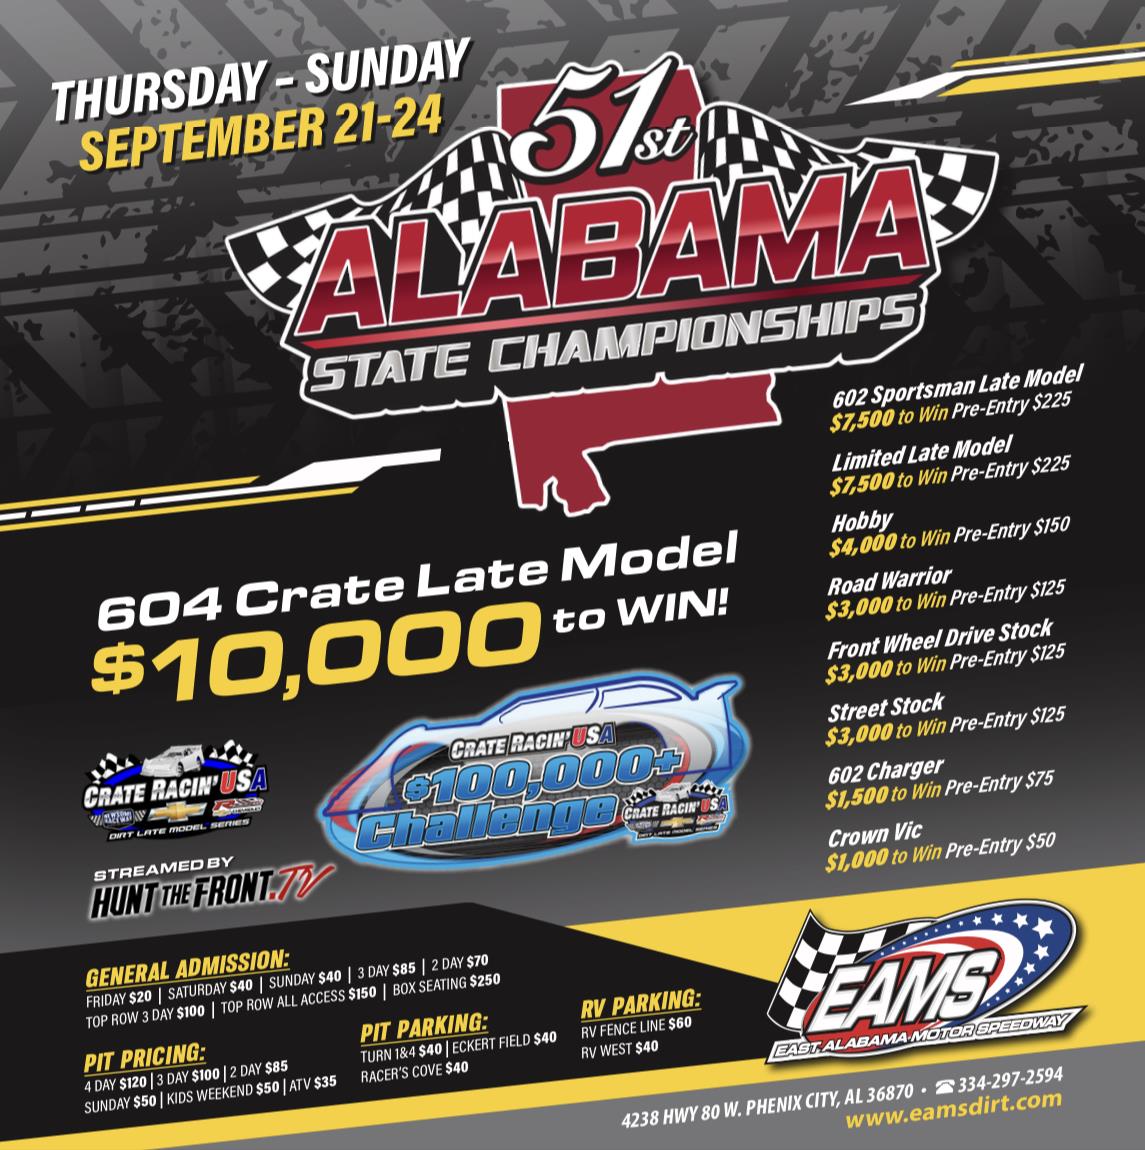 51st Annual Alabama State Championships - Pre-registration is now open